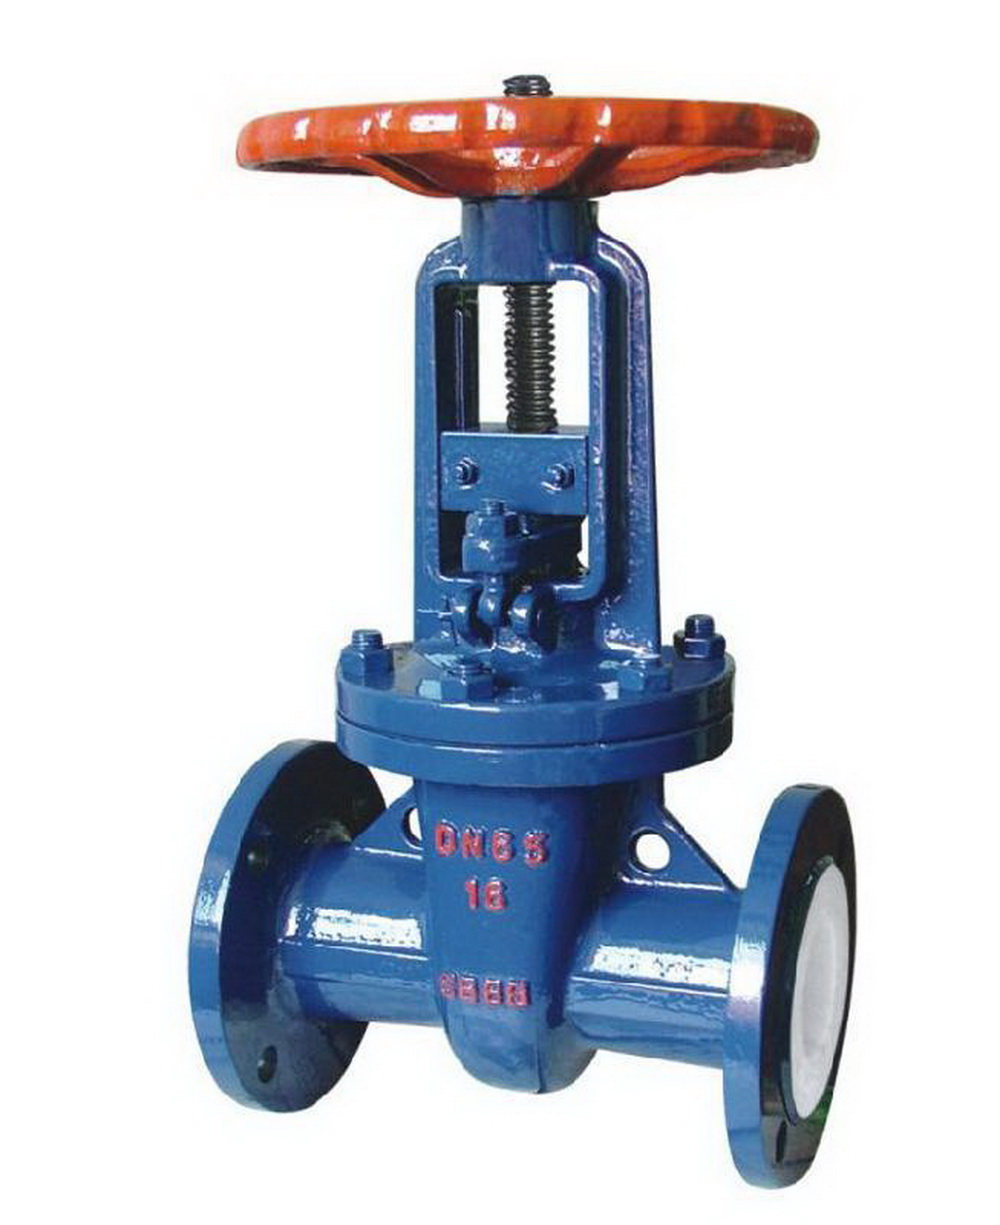 The defect analysis of China gate valve: the structure is more complex and the maintenance is inconvenient